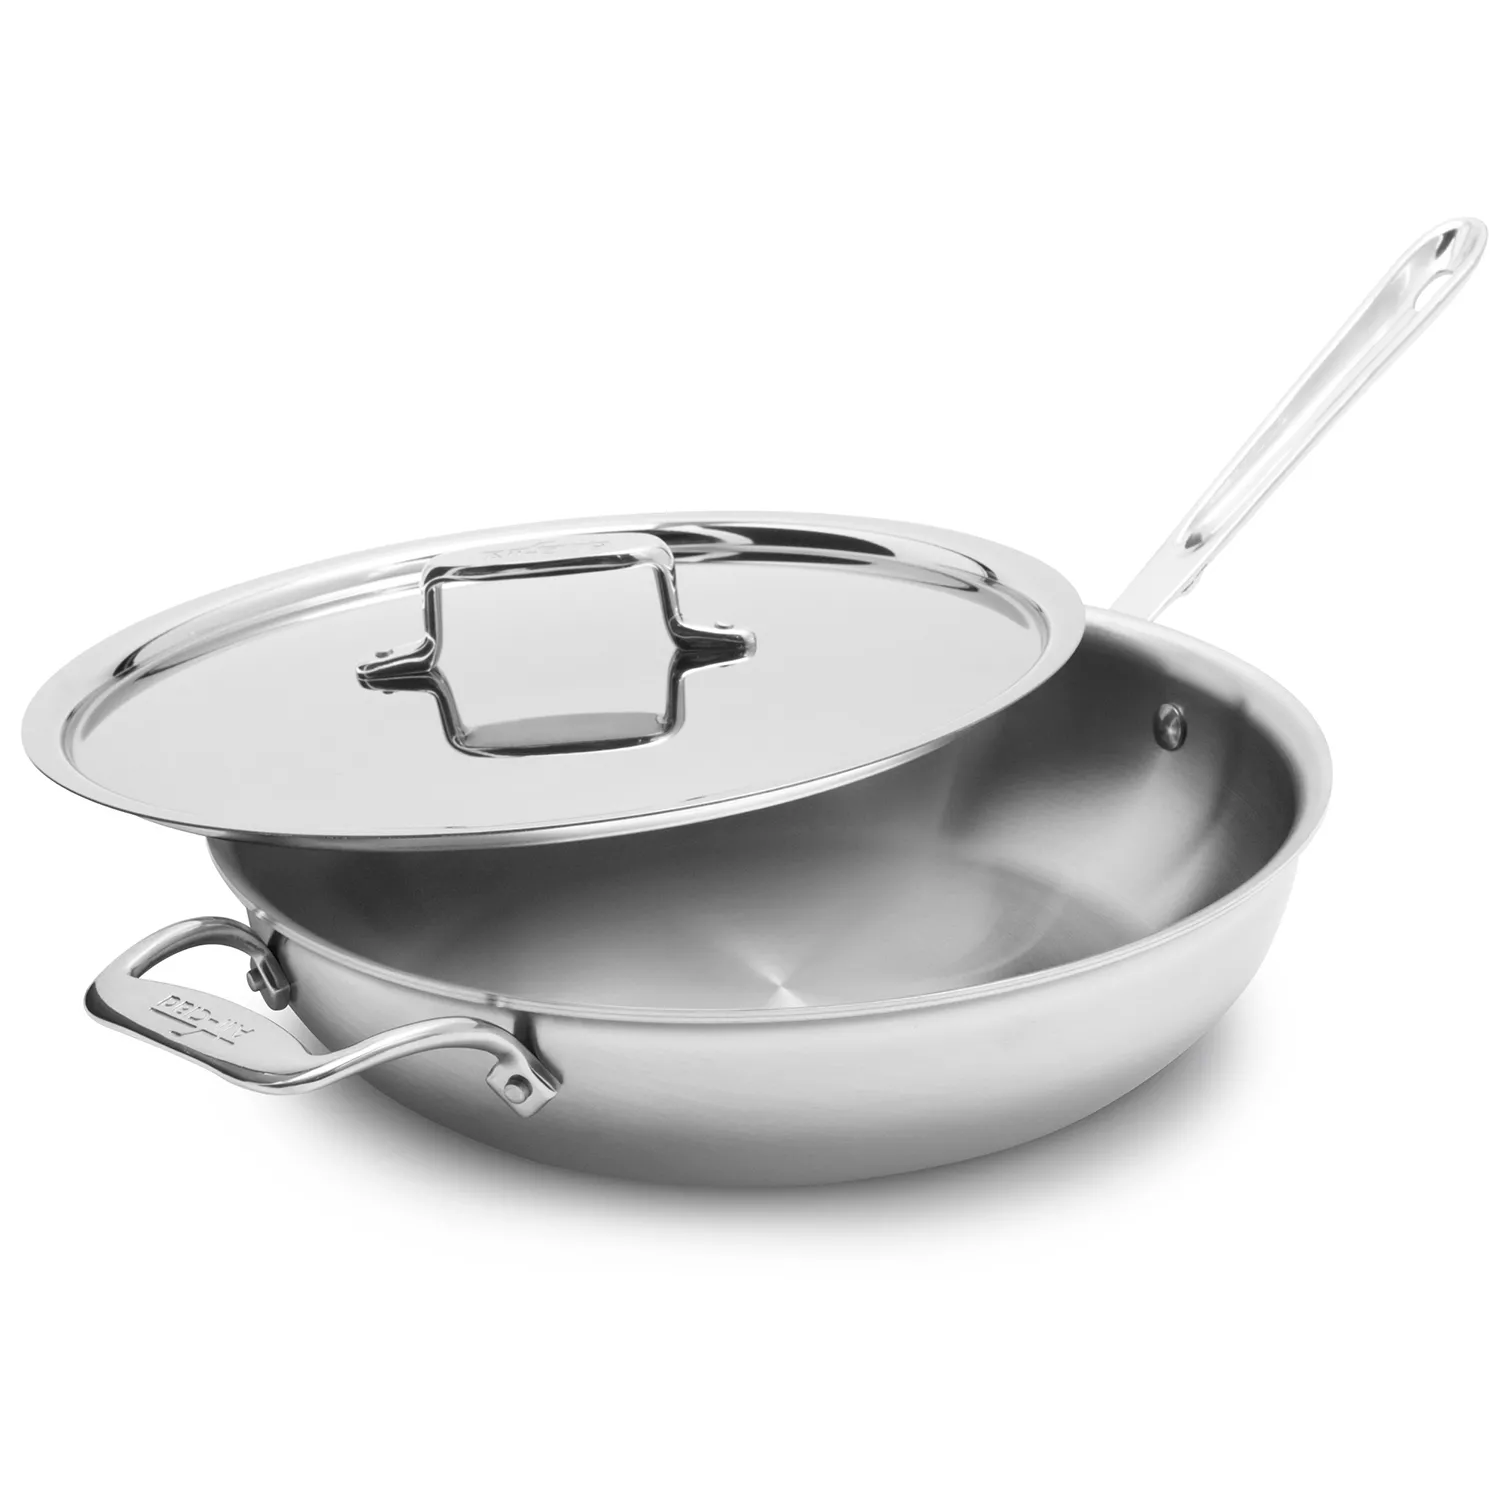 All Clad Brushed D5 4 Quart Sauce Pan with Lid - Stainless